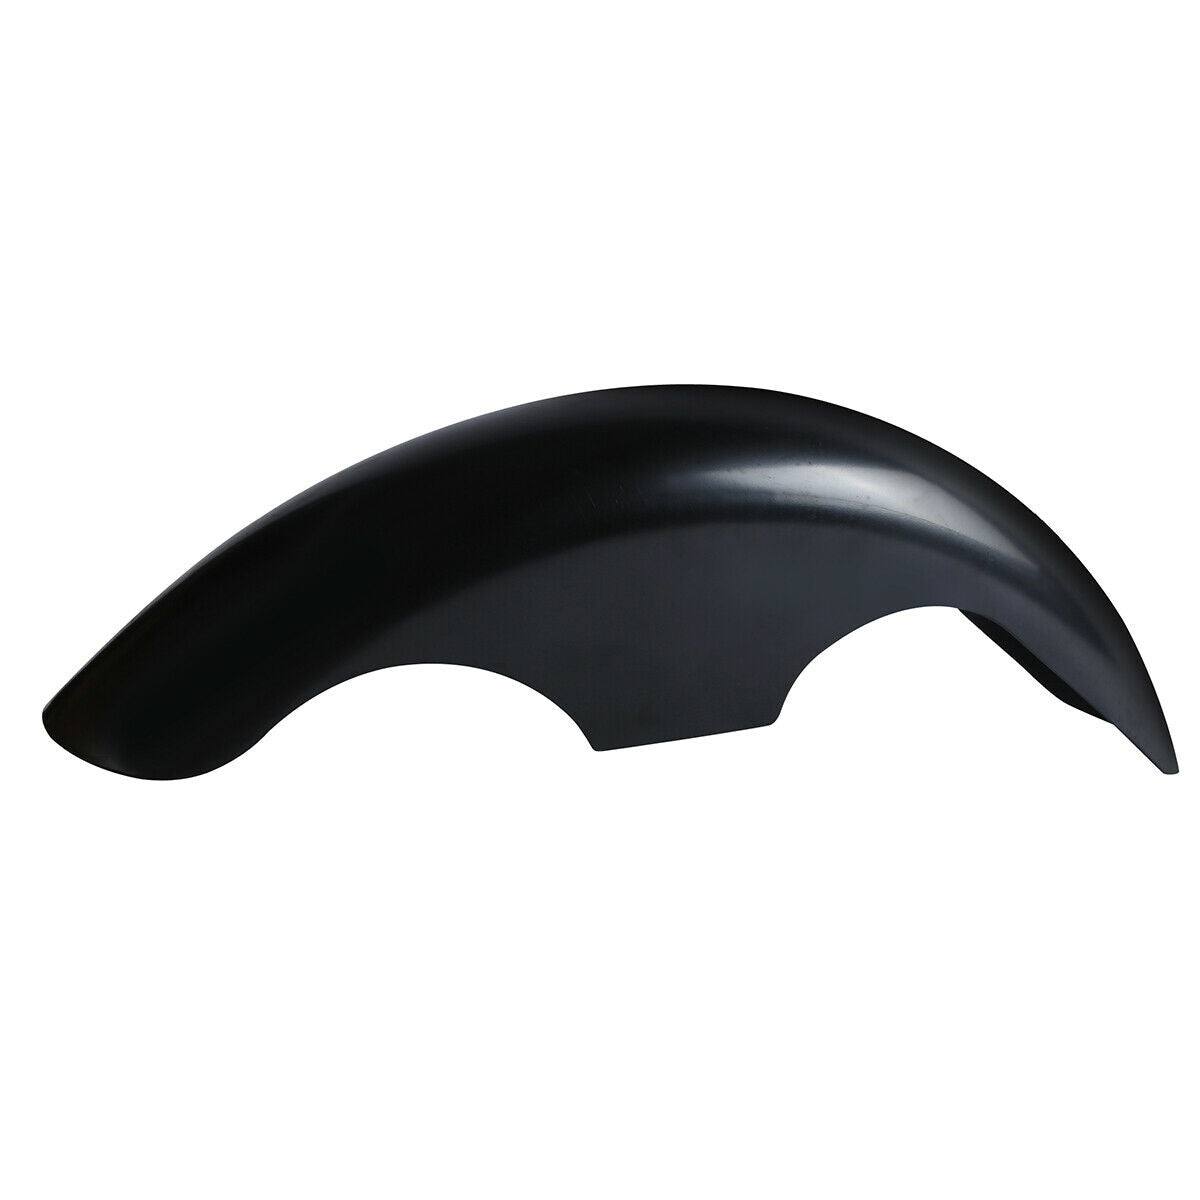 Unpainted 21" Wheel 4.5" Wide Front Fender Fit For Harley Touring Softail Bobber - Moto Life Products